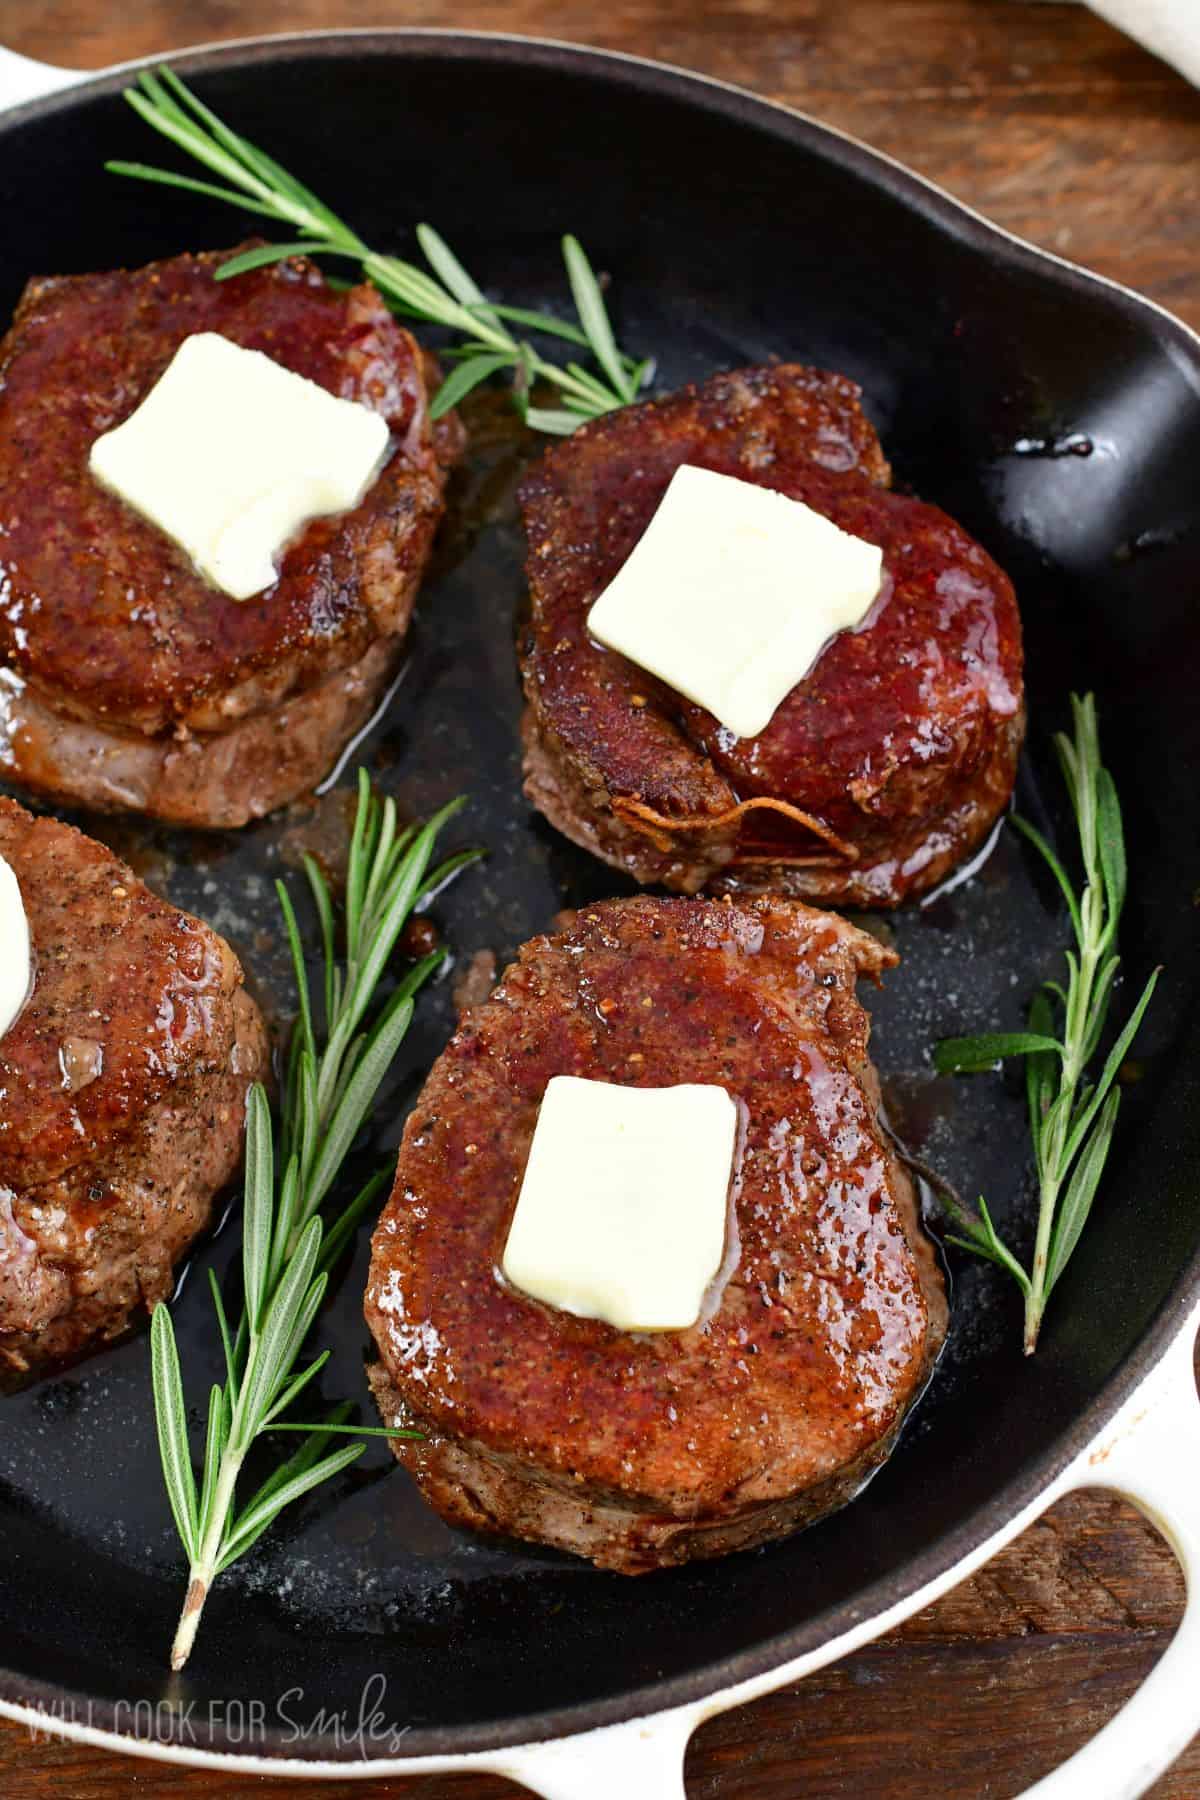 four filet mignon steaks in the skillet with butter and rosemary sprigs.